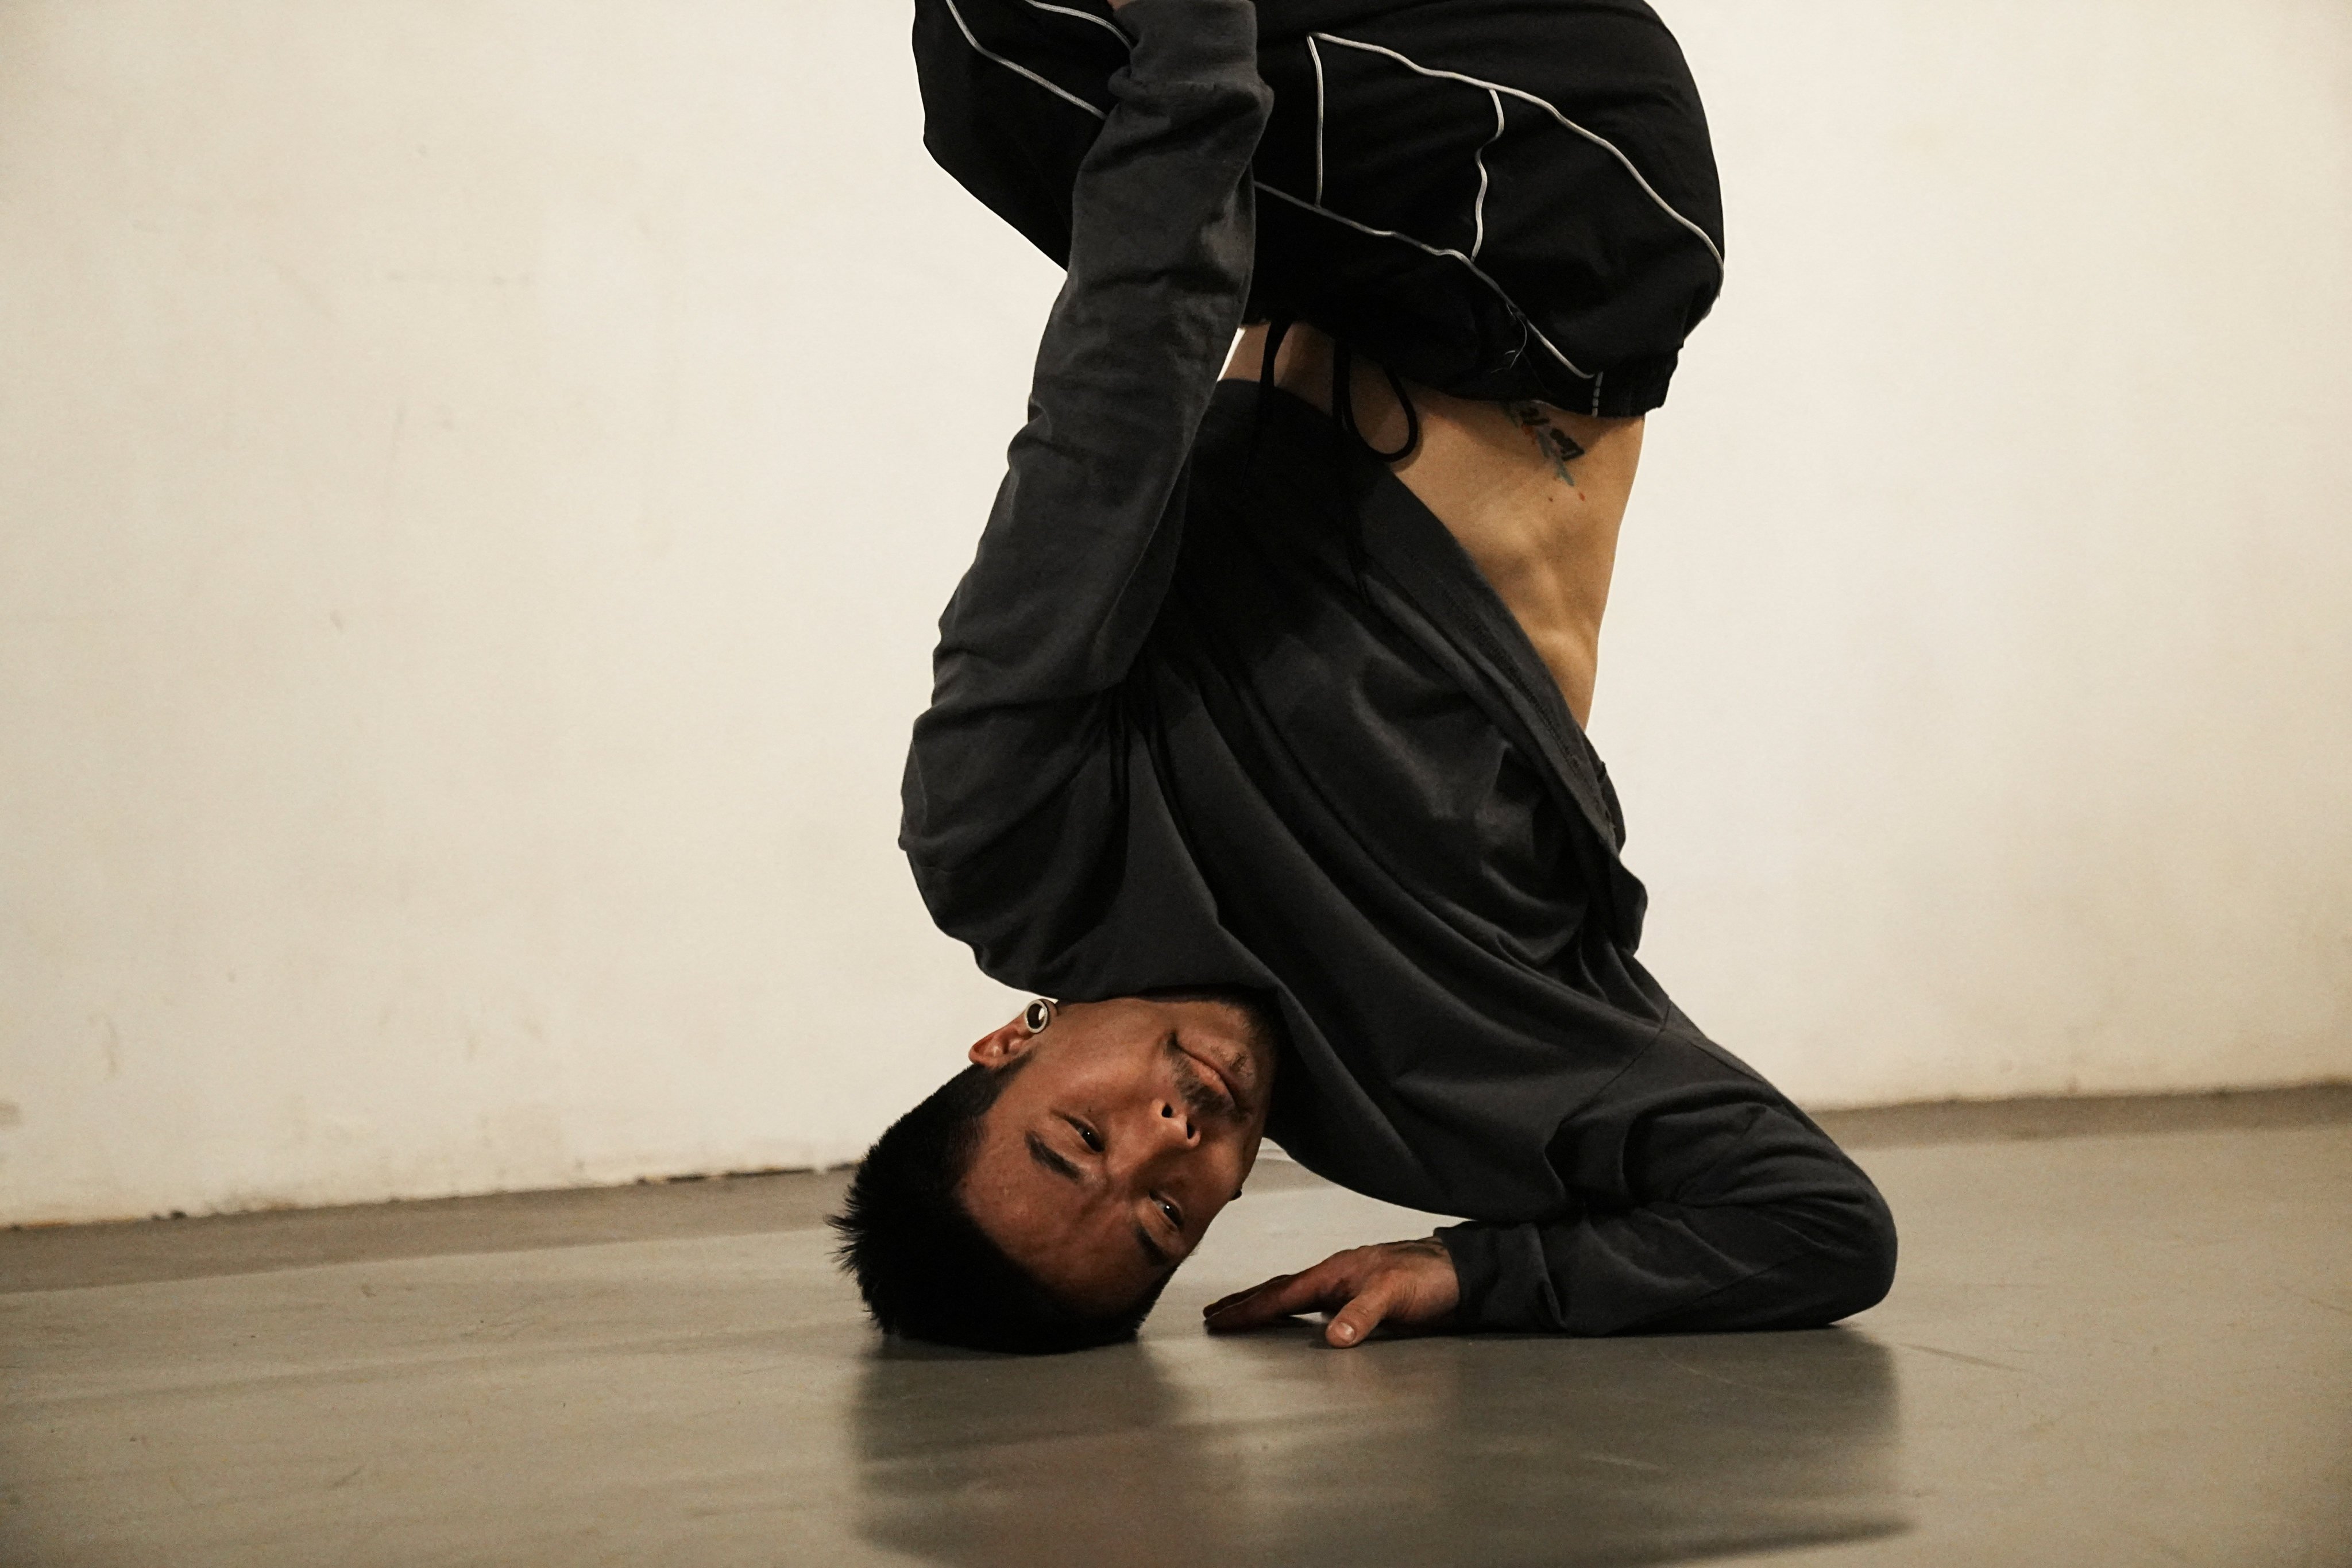 Breakdancer Cheung Cheuk-Man practices at a dancing studio in Hong Kong. Photo: Reuters